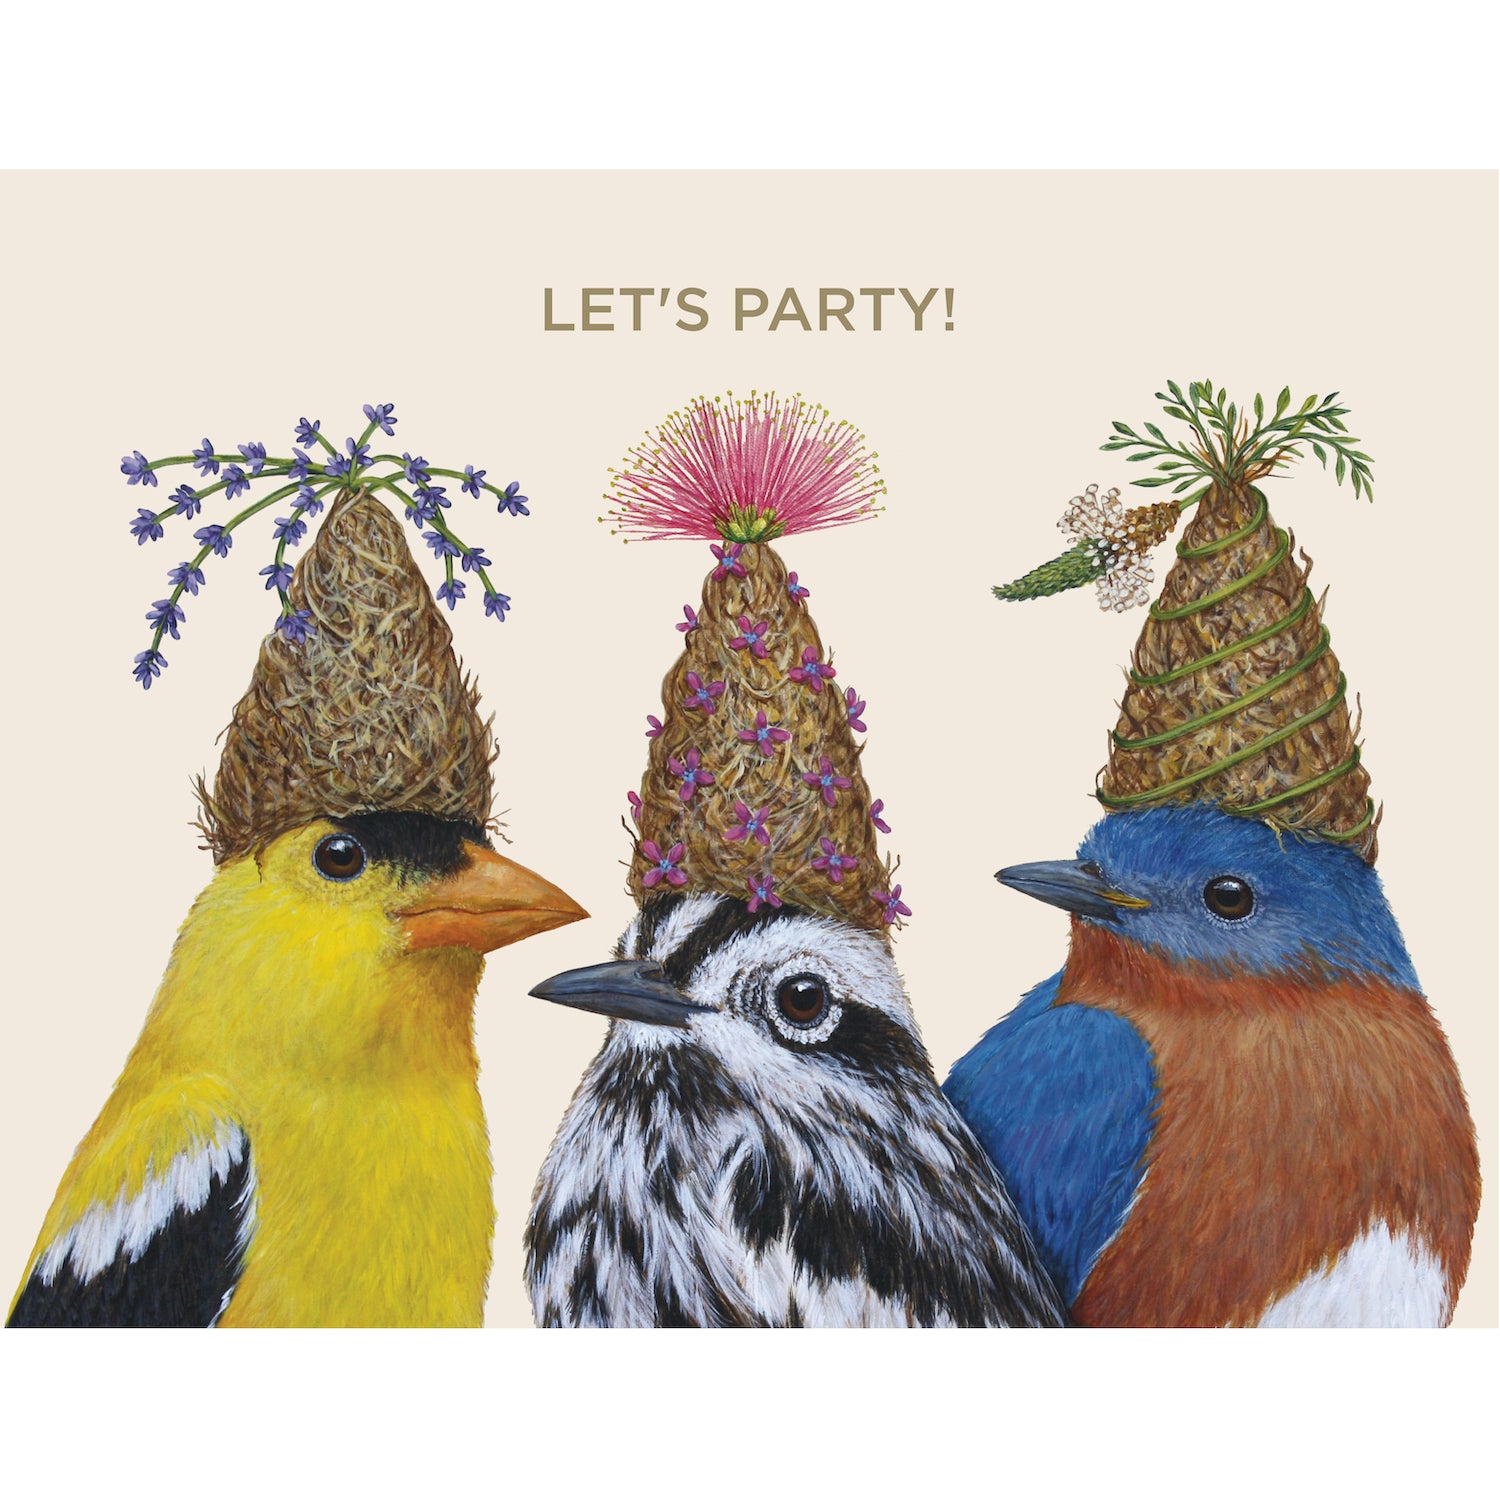 Three birds wearing party hats with the distinctive artwork of Hester &amp; Cook&